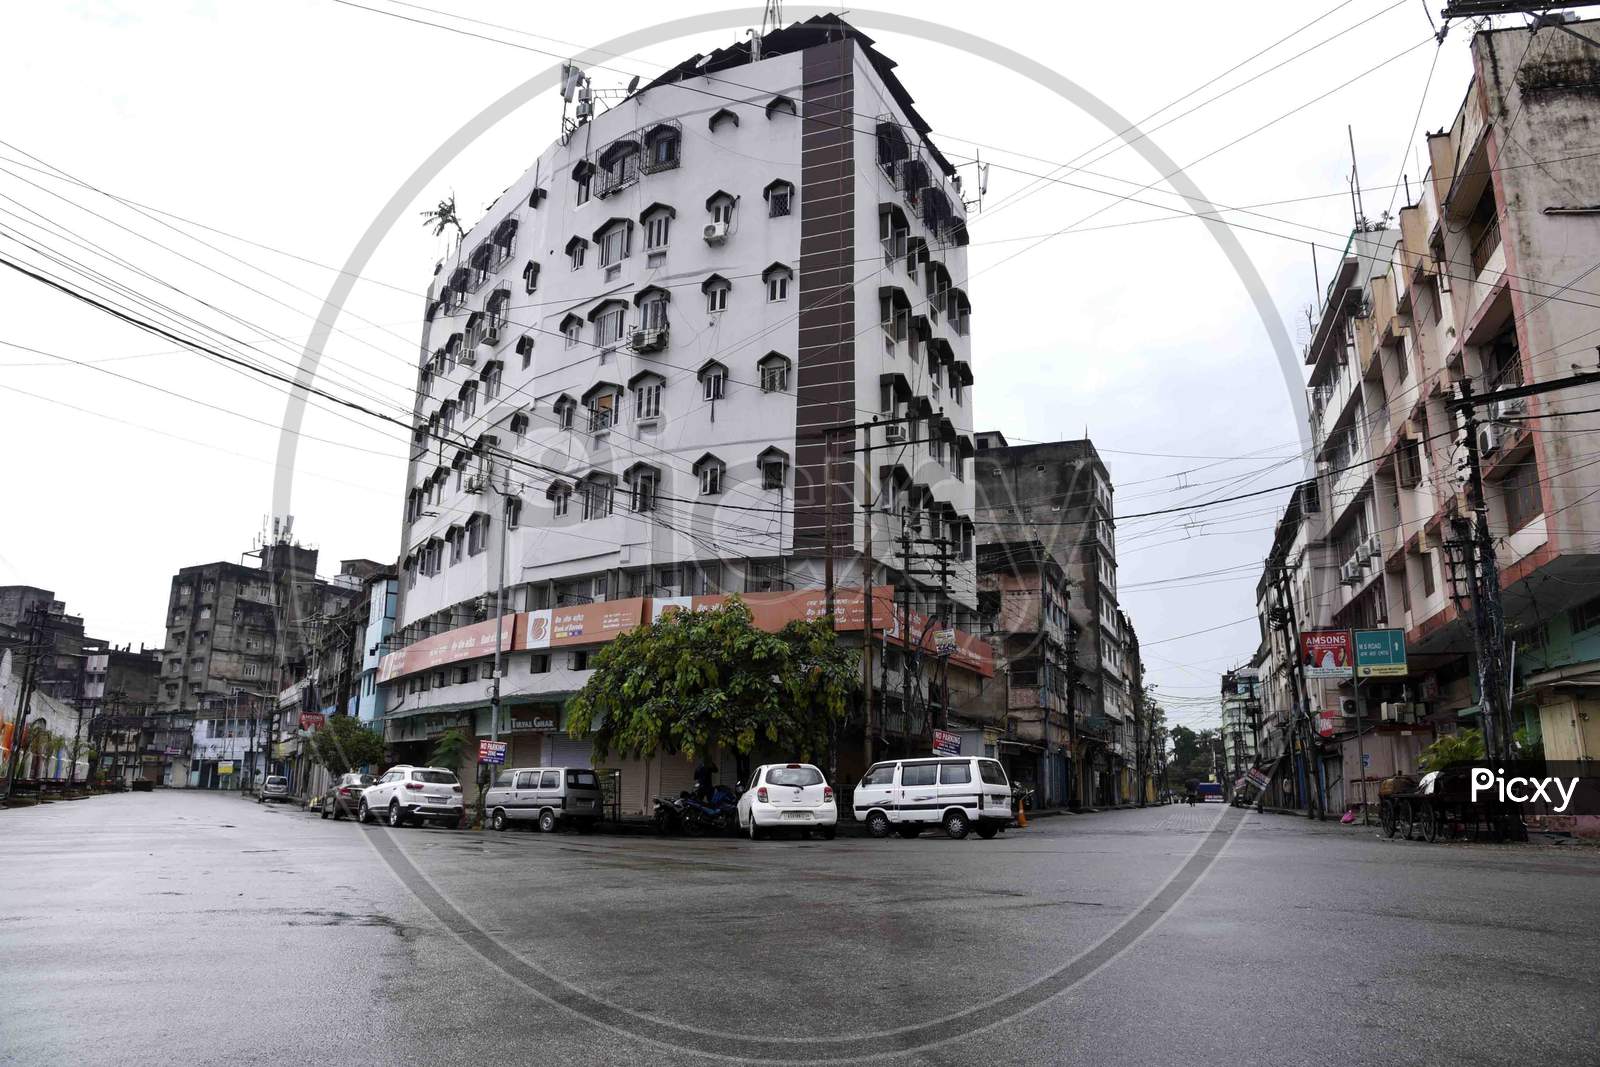 A view of Fancy Bazar deserted look